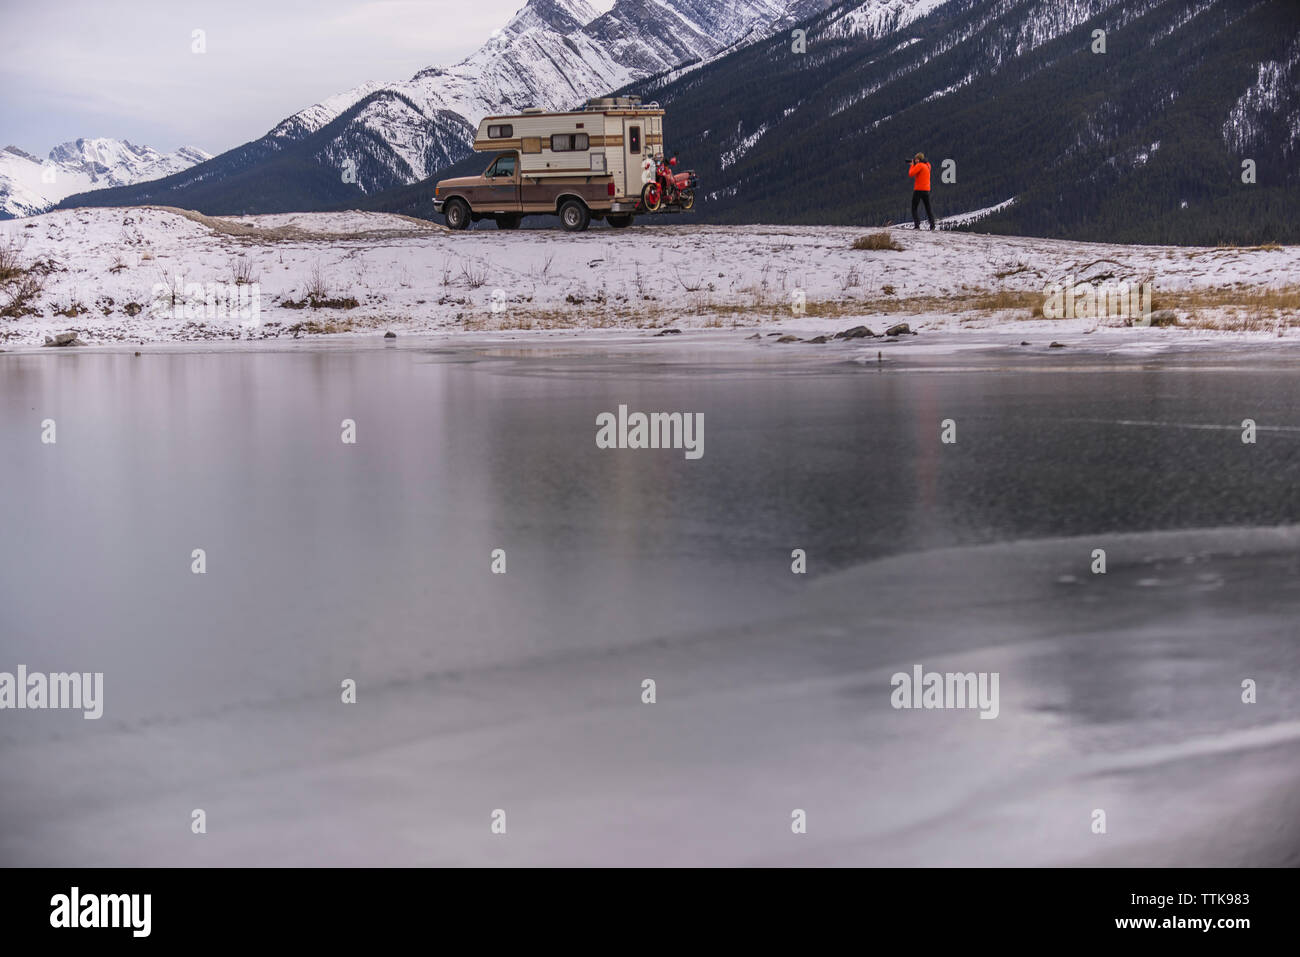 Man taking photo of Camper Truck with Touring Motorcycle in Canmore Stock Photo